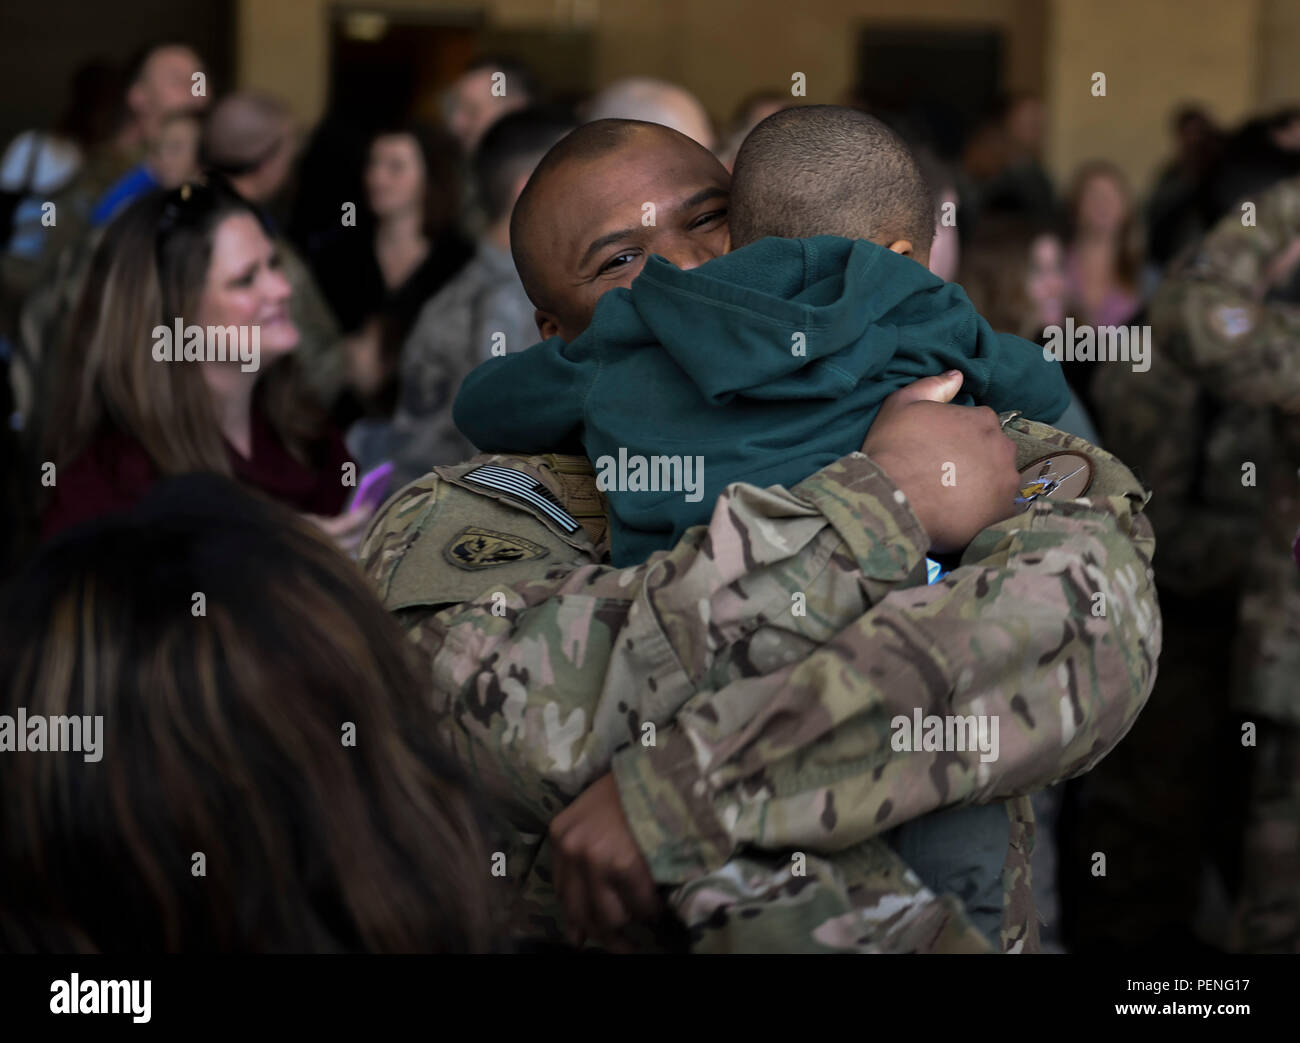 Stagg Sgt. Kenneth Redmon, an armament systems craftsman with the 1st Special Operations Aircraft Maintenance Squadron, reunites with his son during an Operation Homecoming at the Deployment Control Center on Hurlburt Field, Fla., Jan 13, 2016. The Operation Homecoming brought approximately 80 Airmen home from their deployment overseas.  (U.S. Air Force photo by Senior Airman Ryan Conroy) Stock Photo